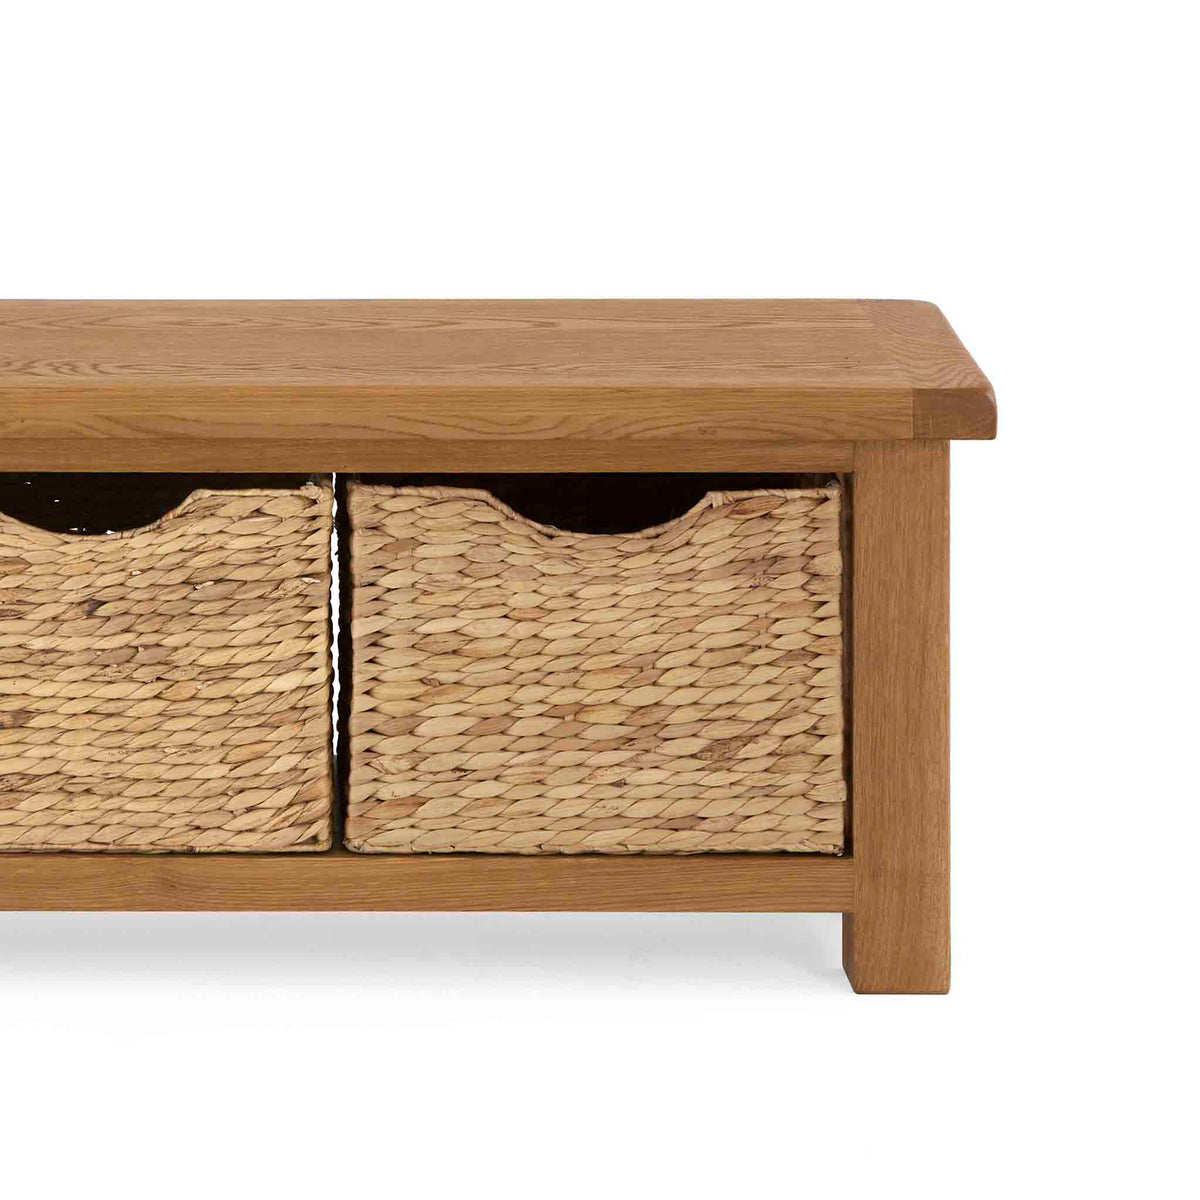 Zelah Oak Bench with Baskets - Close up of bench seat and baskets